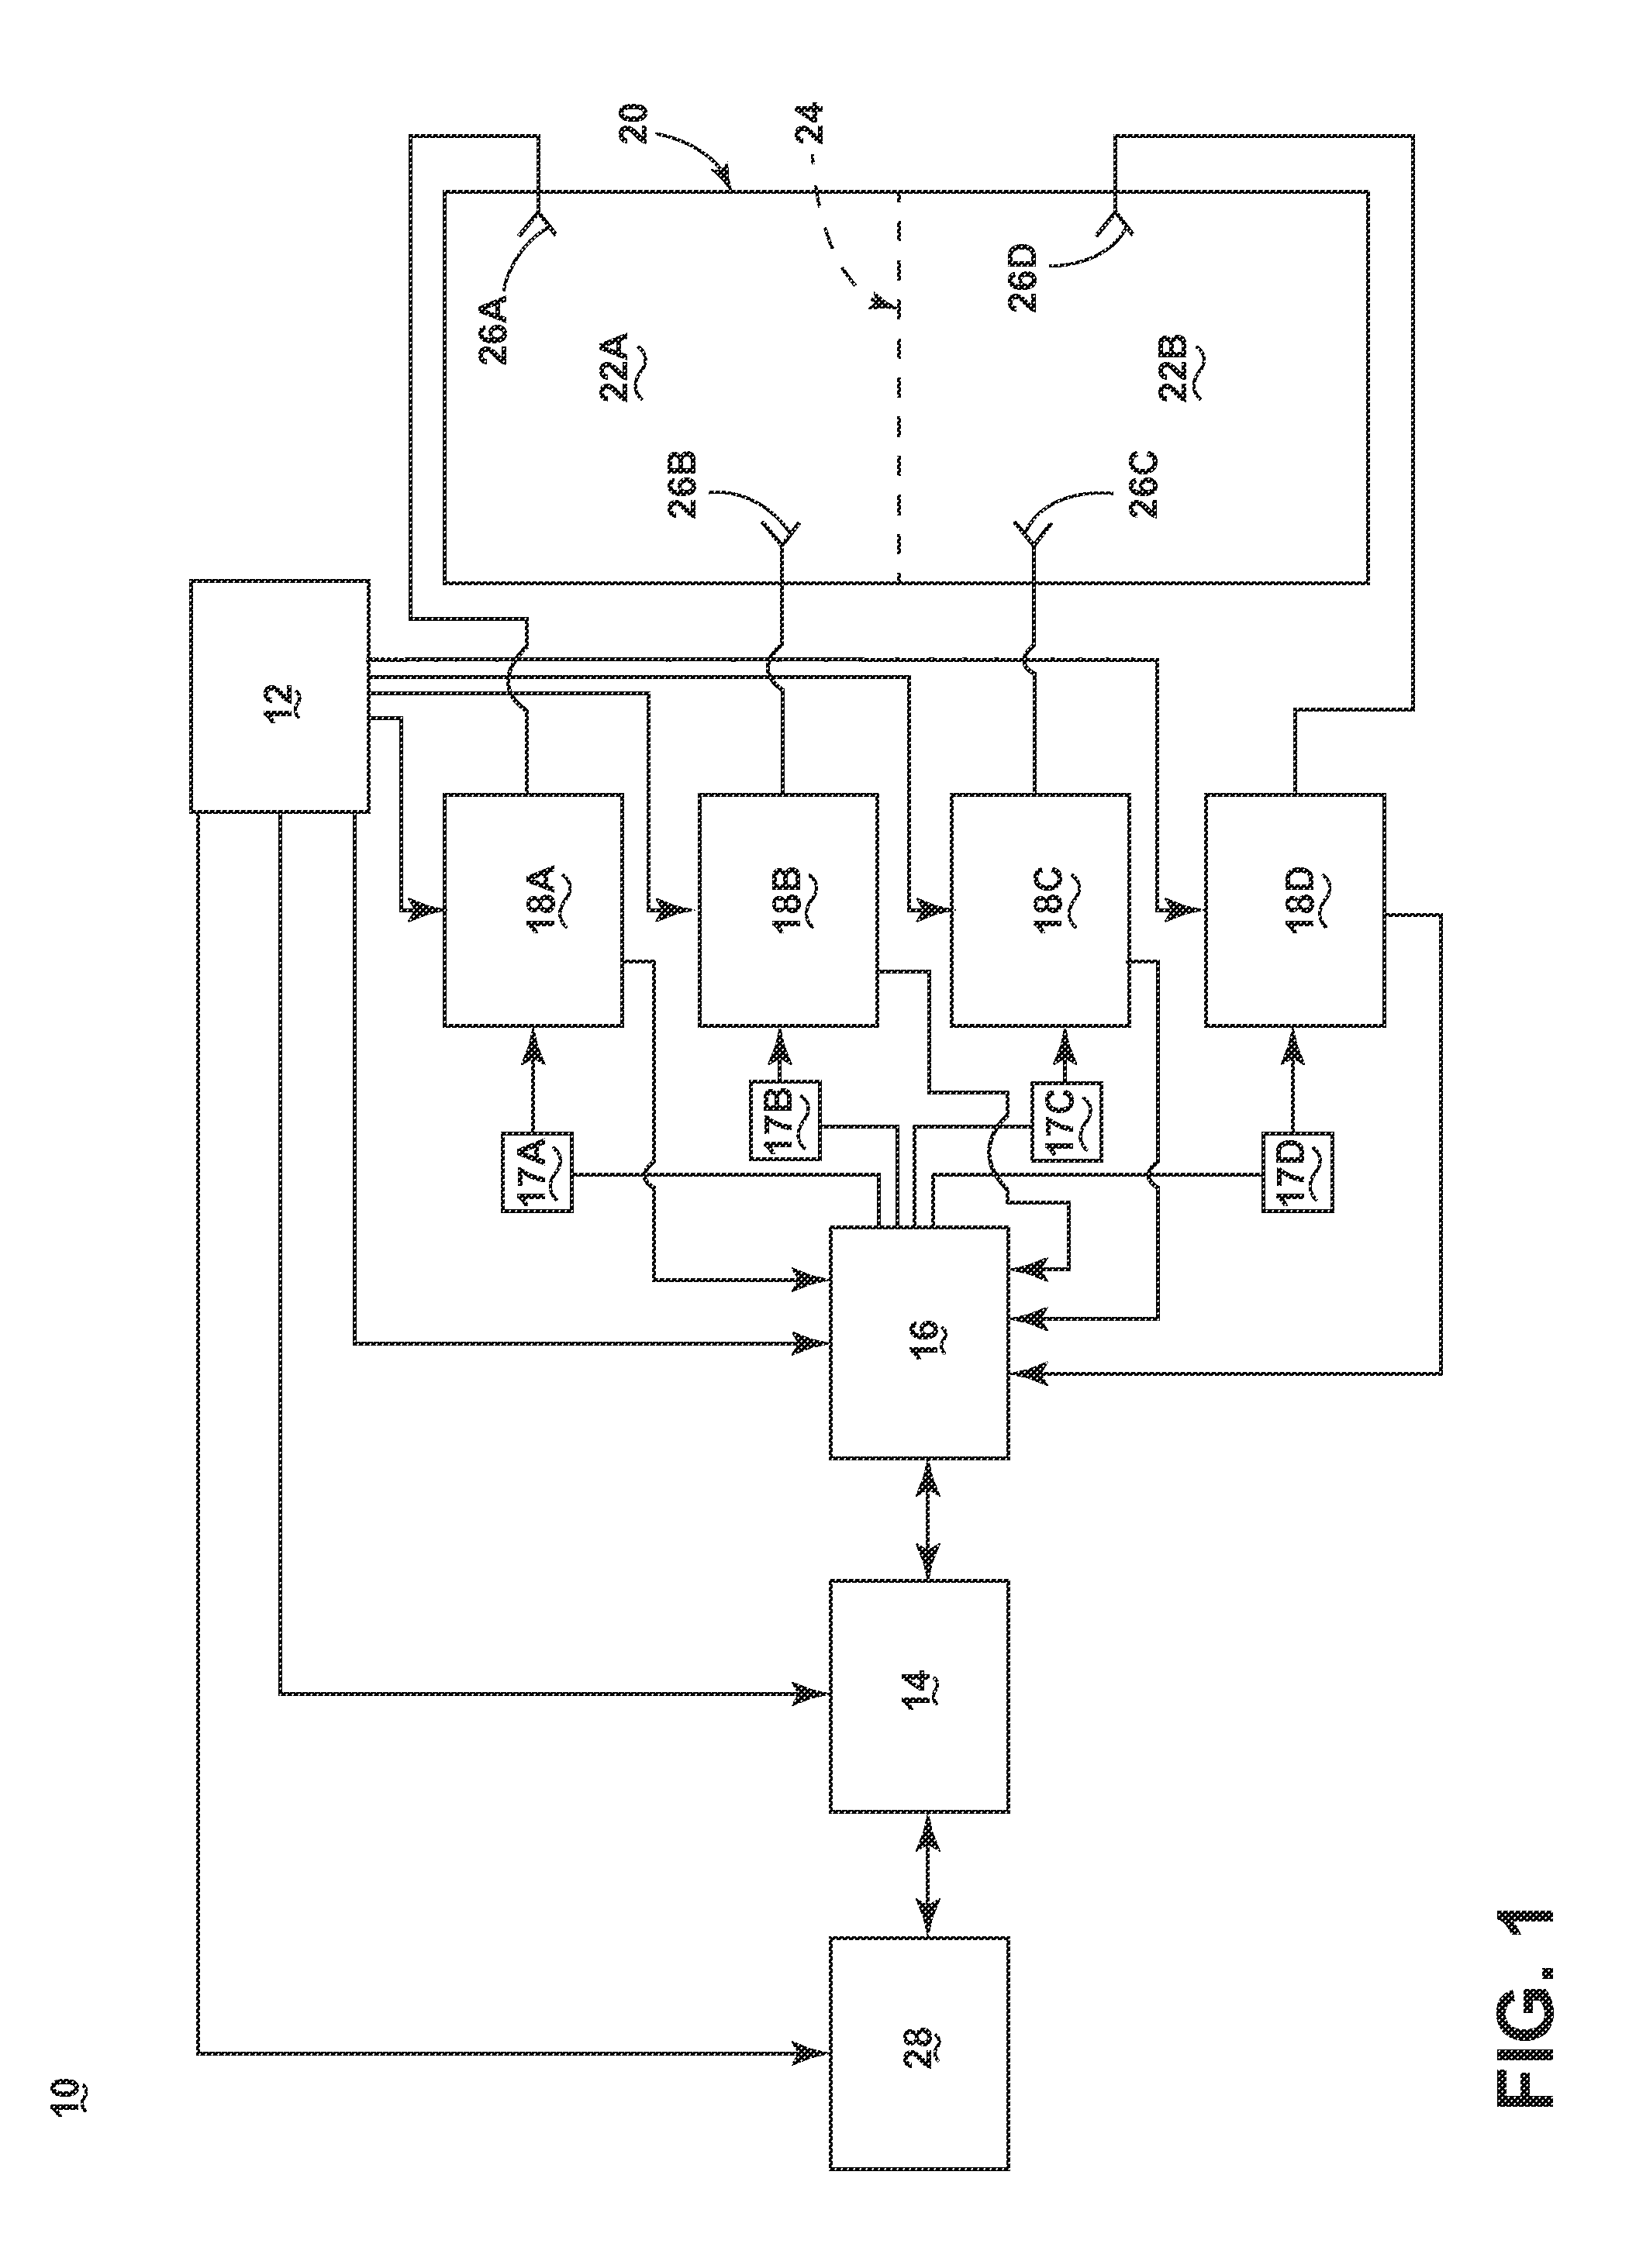 Solid-state microwave device